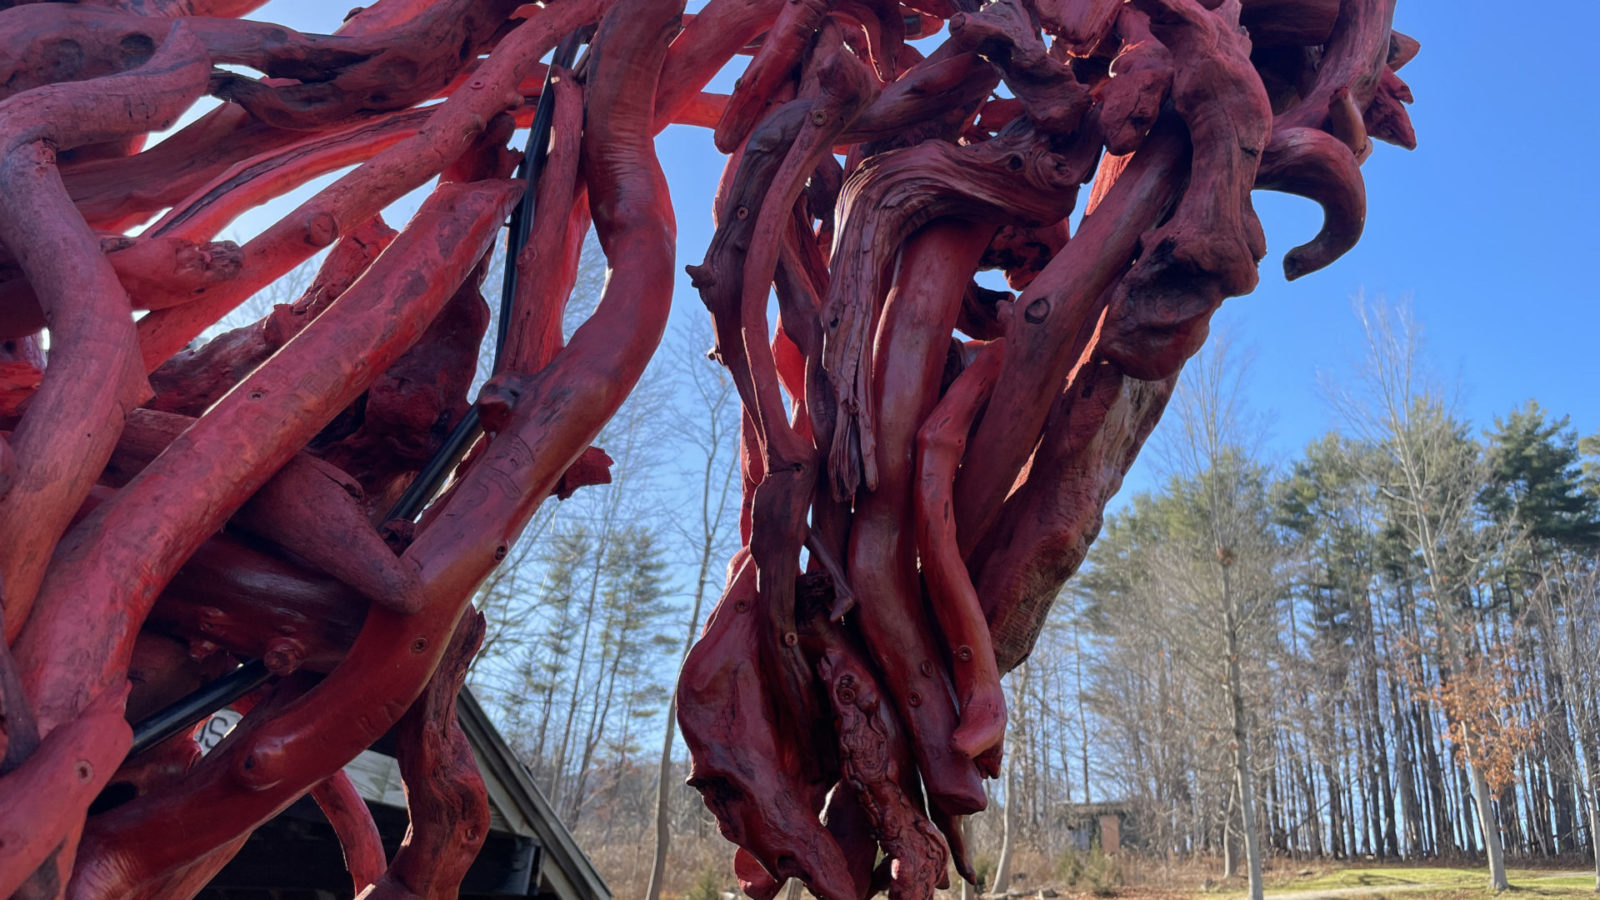 A horse sculpture made of scarlet vines canters at the foot of the hill at the Bennington Museum.